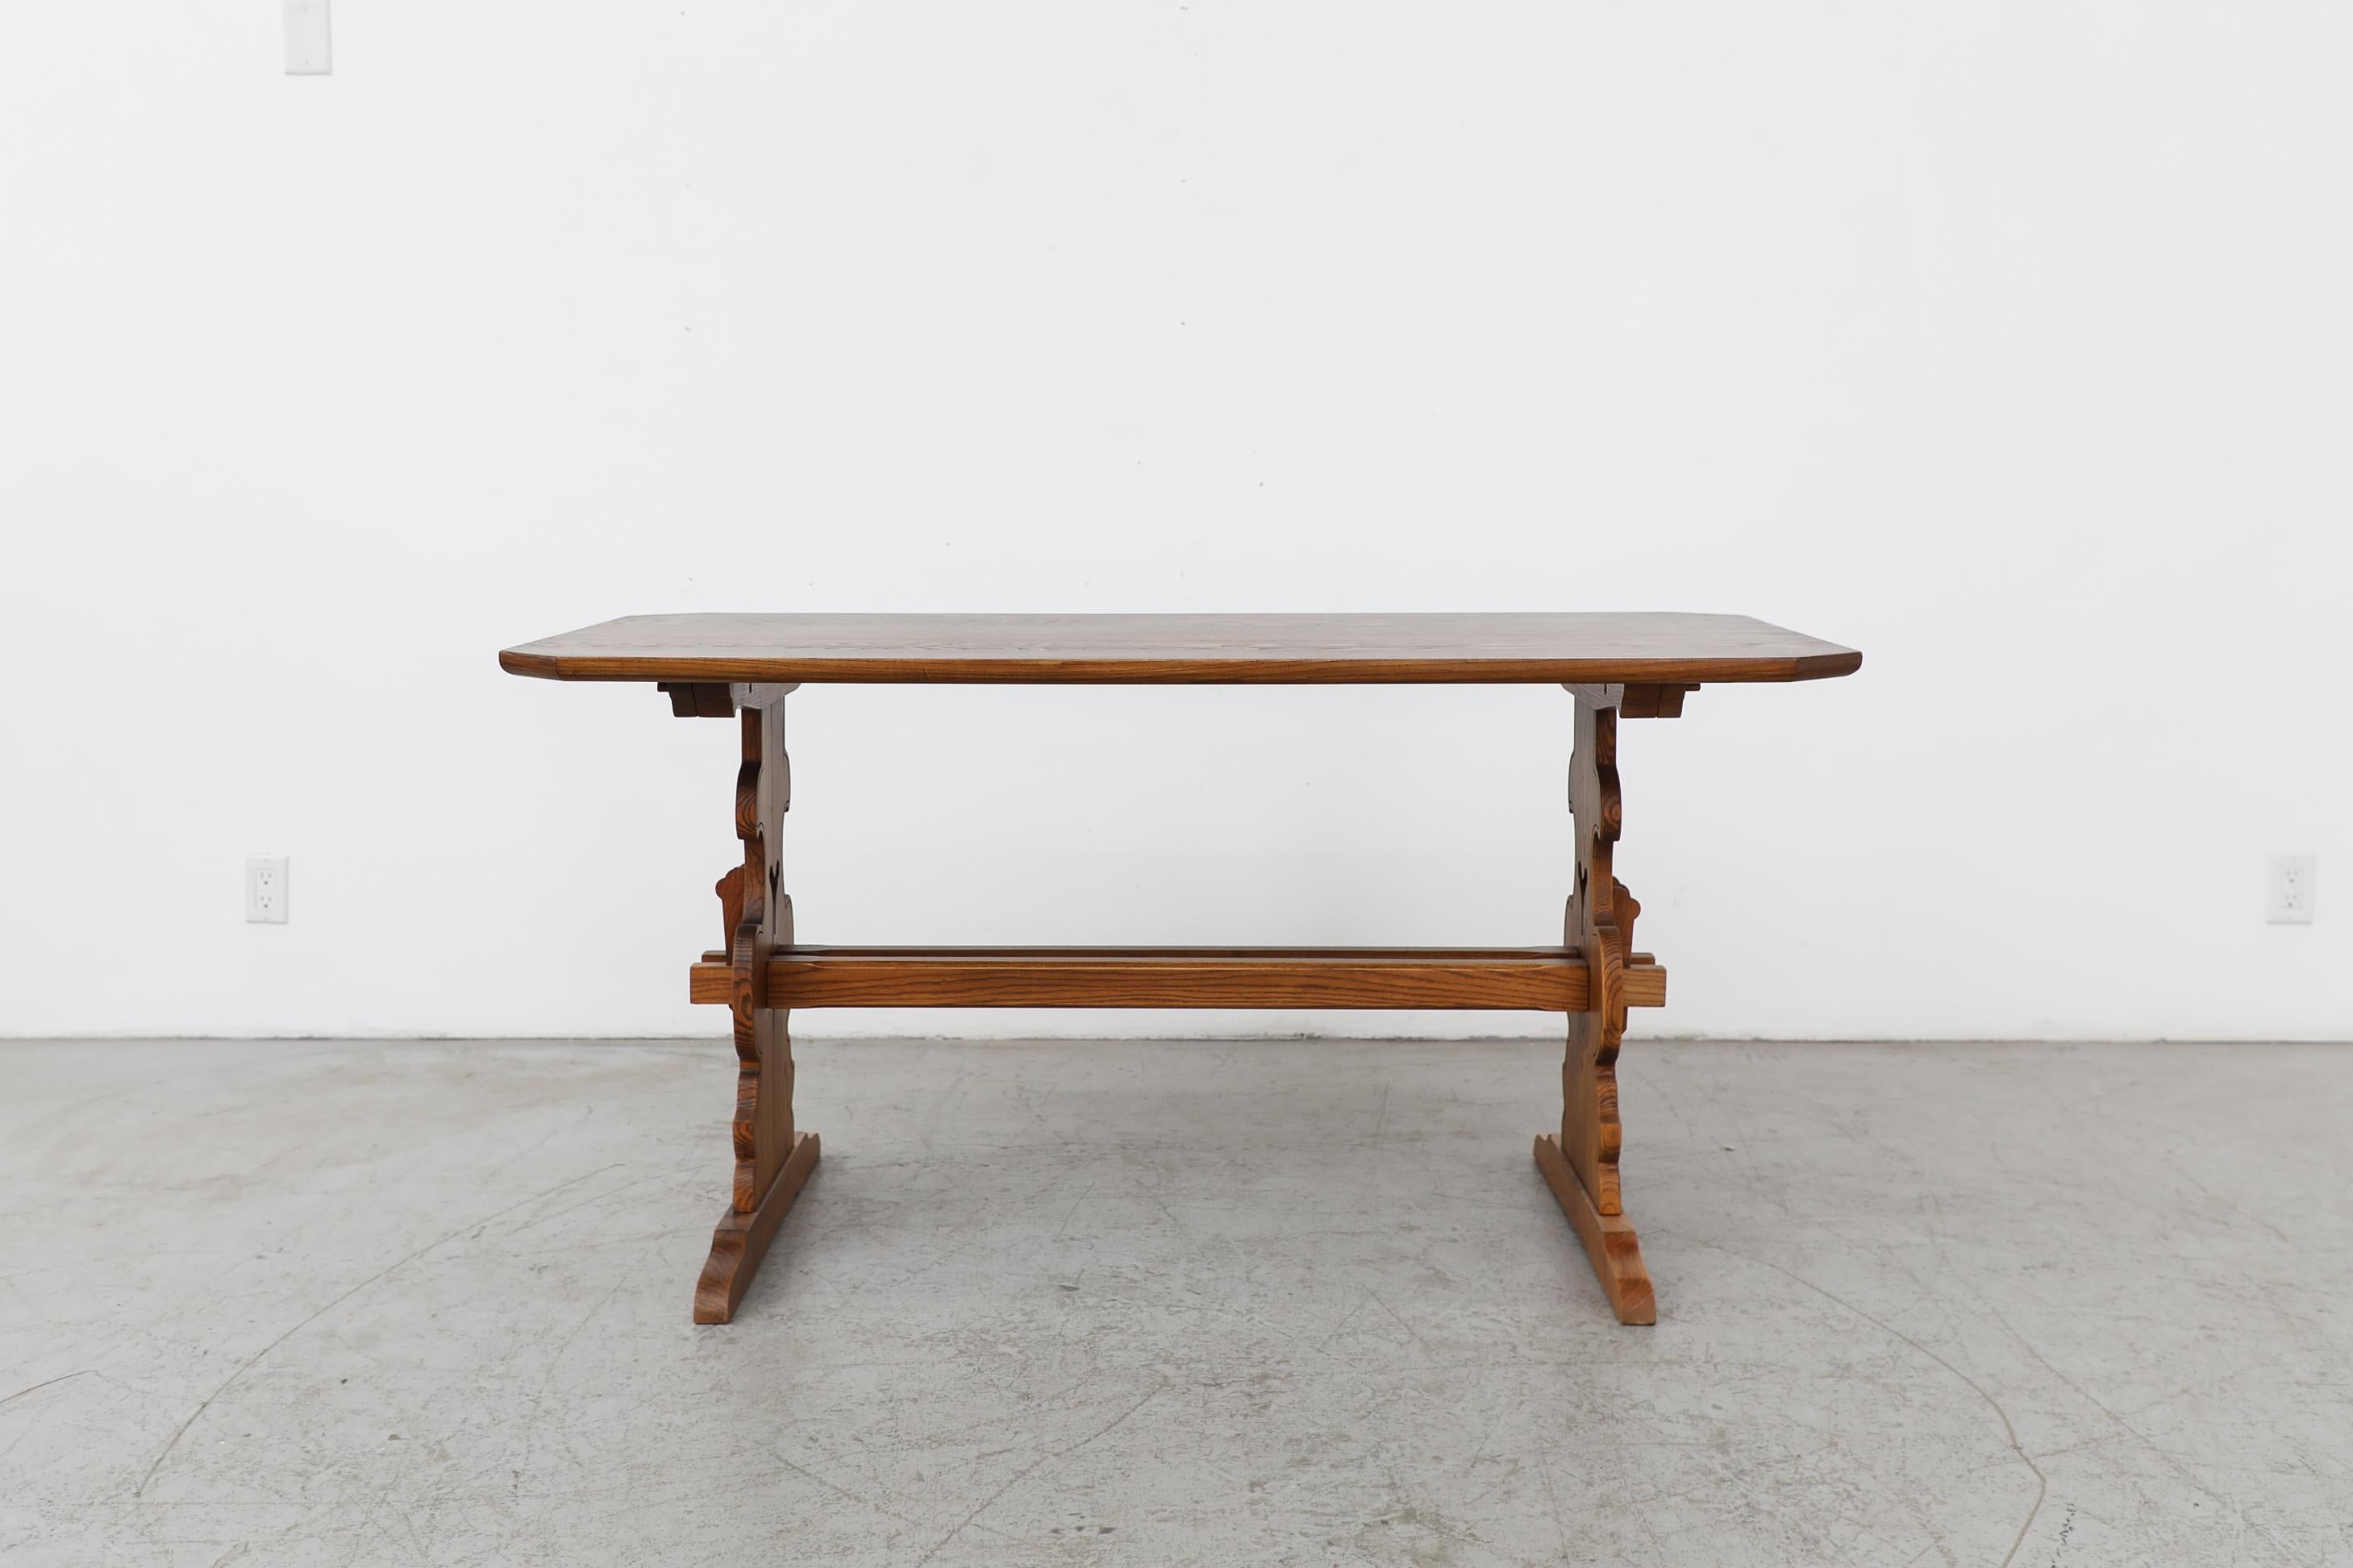 Ornante Tyrolean style dining table with carved trestle base and clipped corners. A versatile and attractive dark toned natural wood table perfect for a cozy nook or an entry way. In original condition with moderate wear and scratching consistent